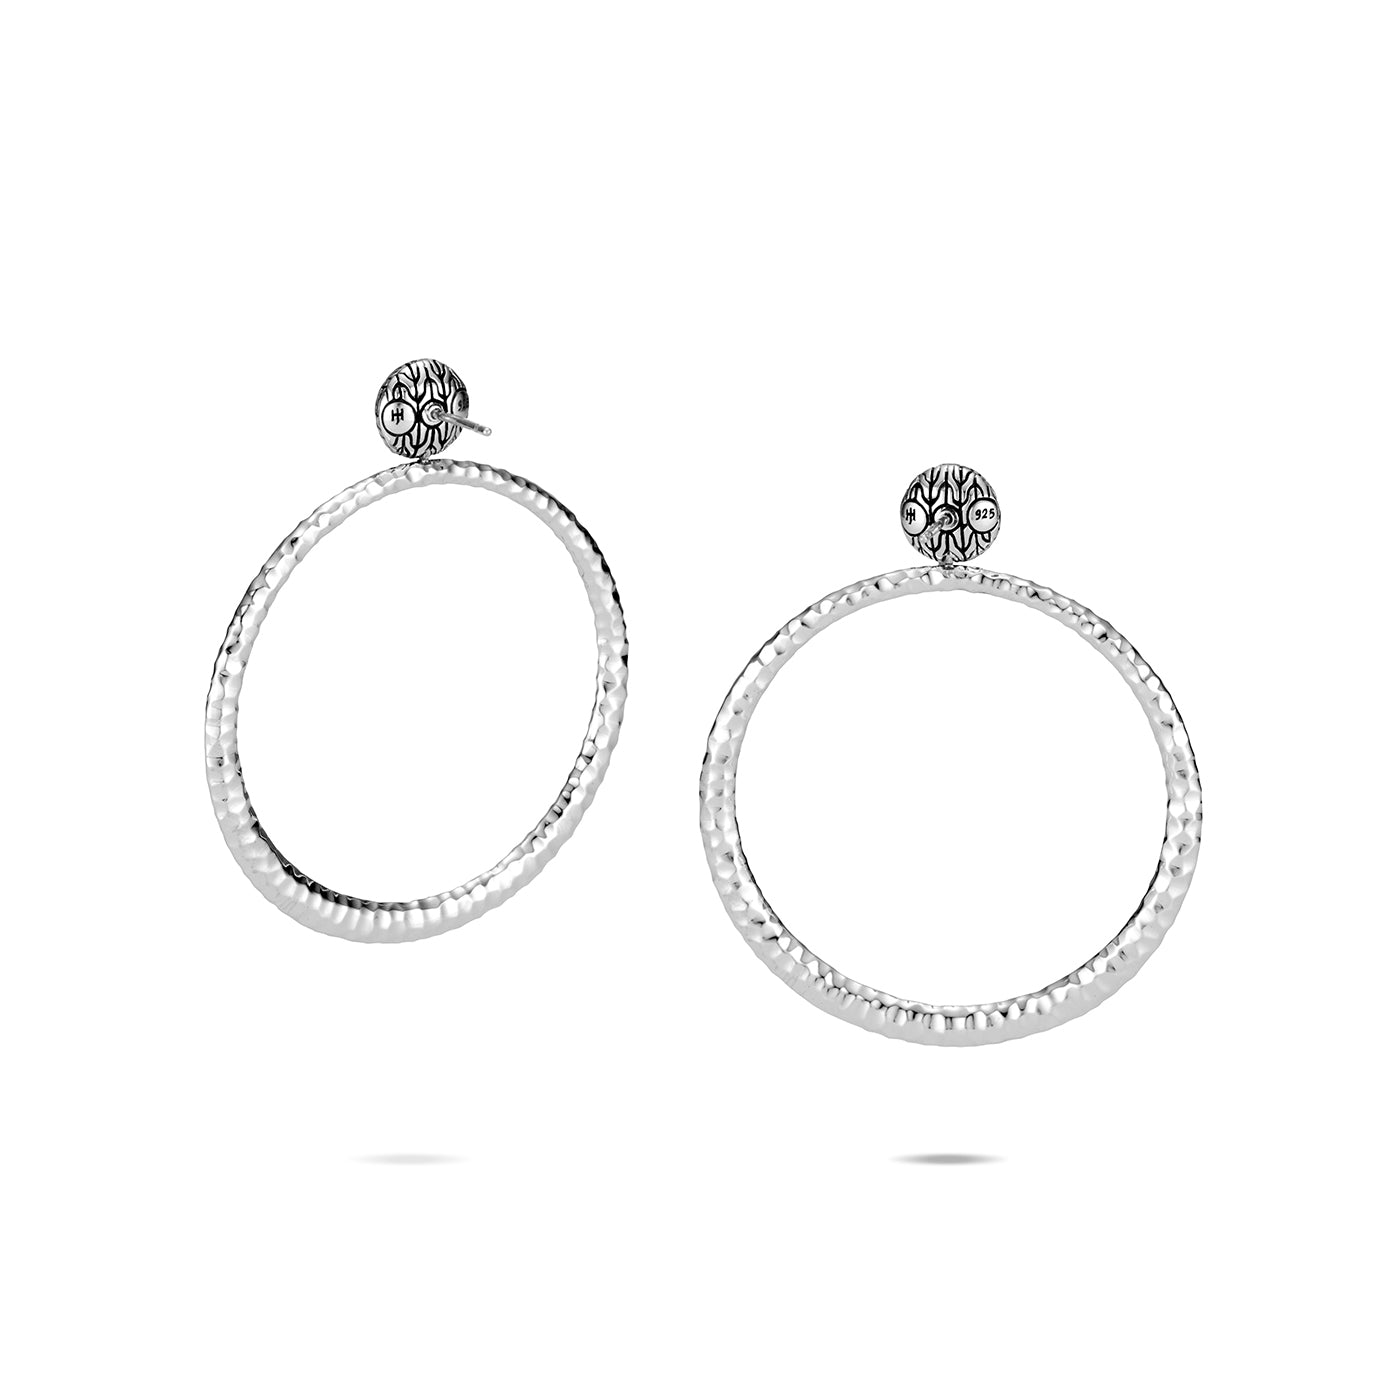 Sterling Silver Round Earrings